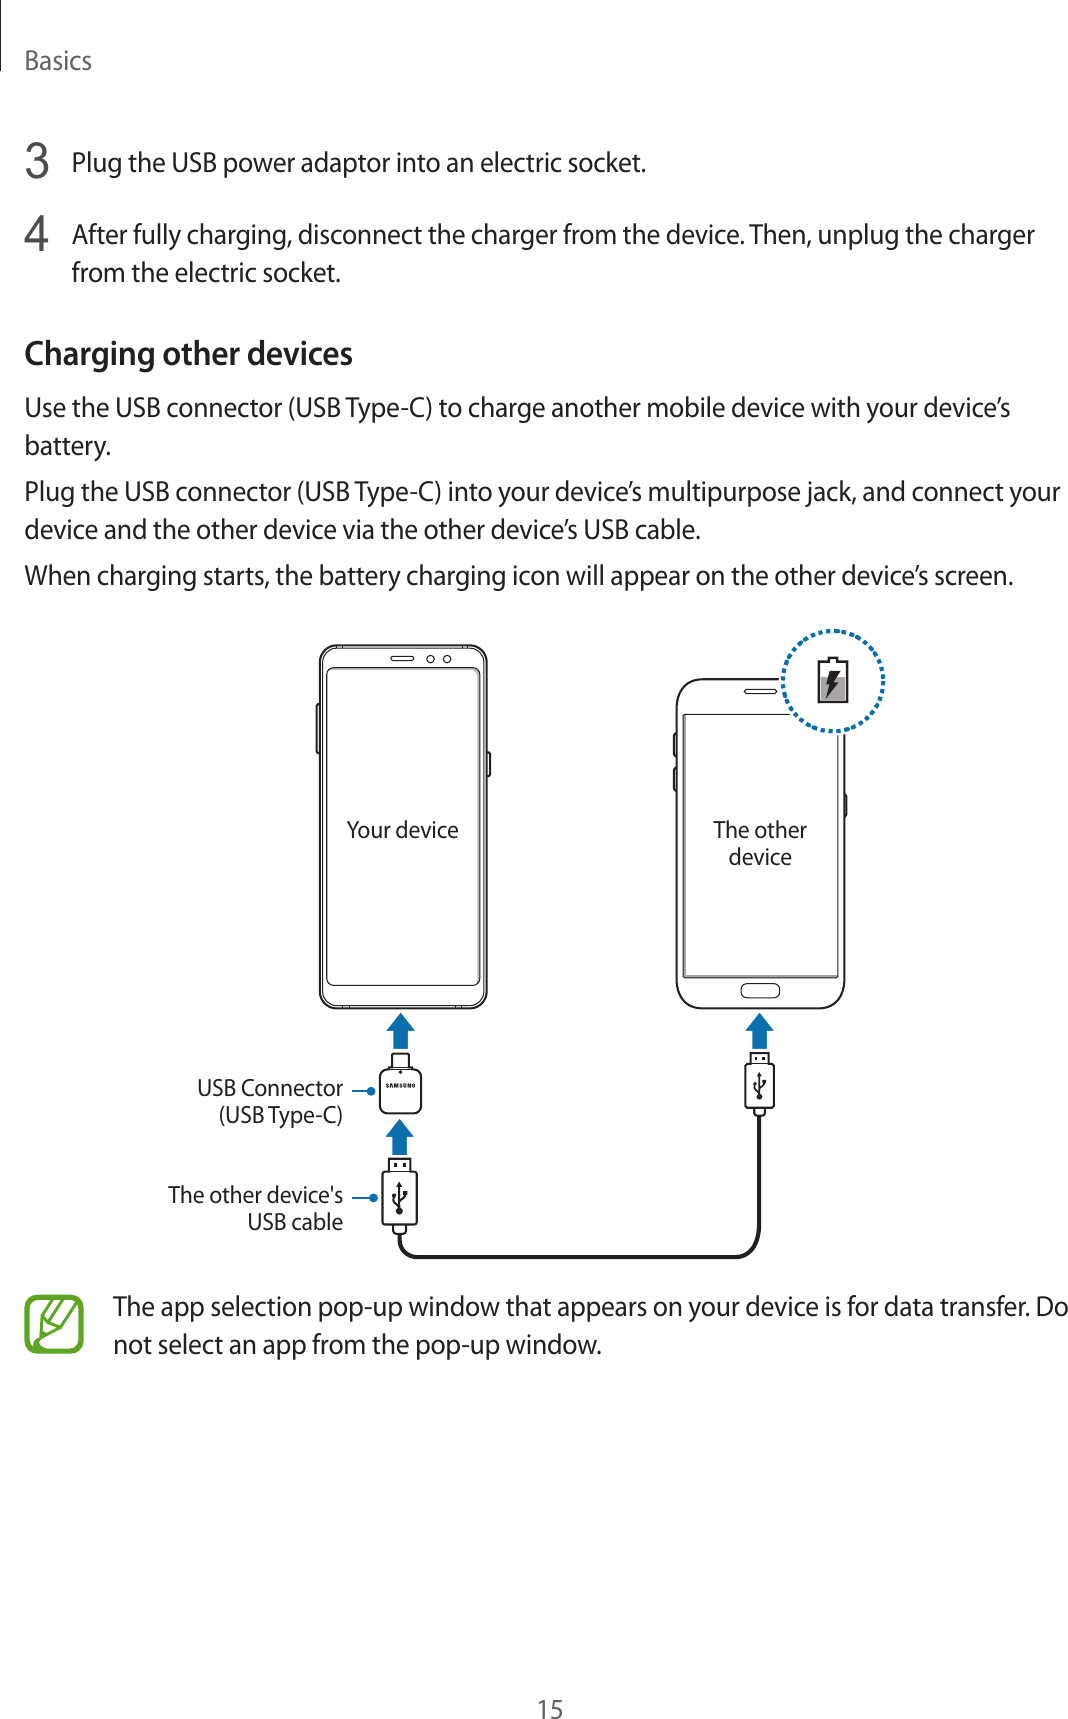 Basics153  Plug the USB power adaptor into an electric socket.4  After fully charging, disconnect the charger from the device. Then, unplug the charger from the electric socket.Charging other devicesUse the USB connector (USB Type-C) to charge another mobile device with your device’s battery.Plug the USB connector (USB Type-C) into your device’s multipurpose jack, and connect your device and the other device via the other device’s USB cable.When charging starts, the battery charging icon will appear on the other device’s screen.Your device The other deviceUSB Connector (USB Type-C)The other device&apos;s USB cableThe app selection pop-up window that appears on your device is for data transfer. Do not select an app from the pop-up window.